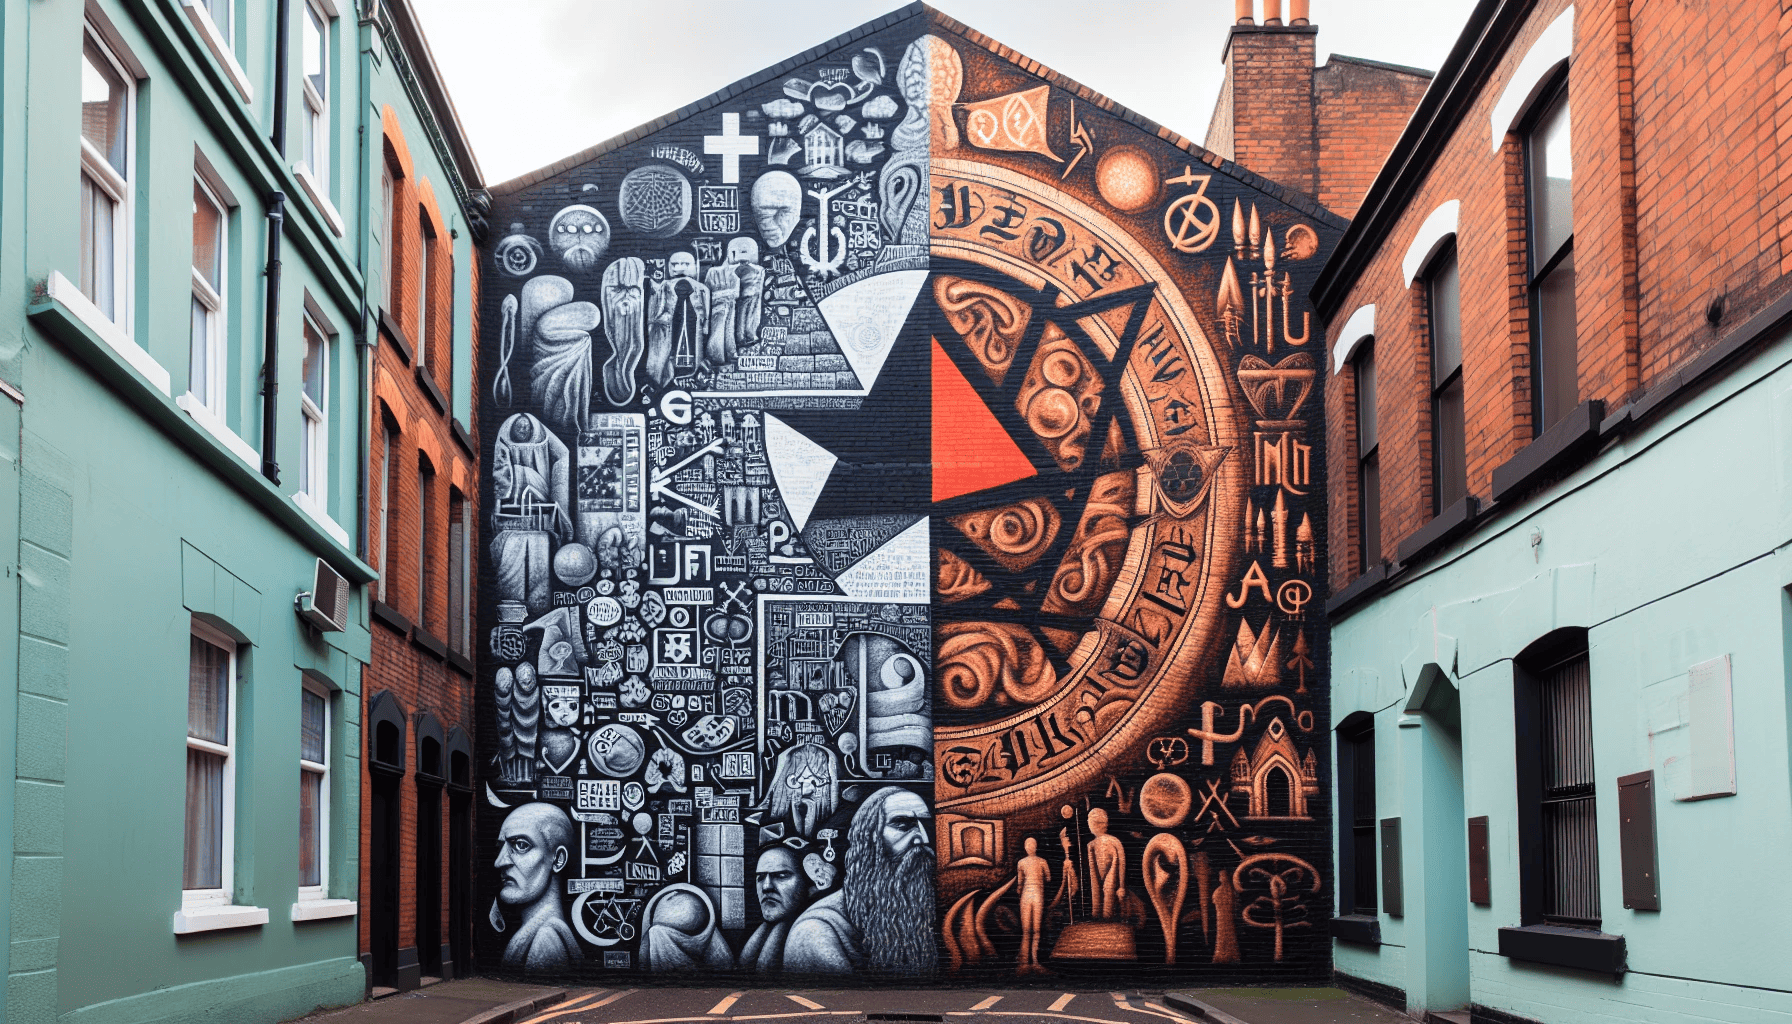 A mural in Belfast depicting the political and religious divisions in Northern Ireland